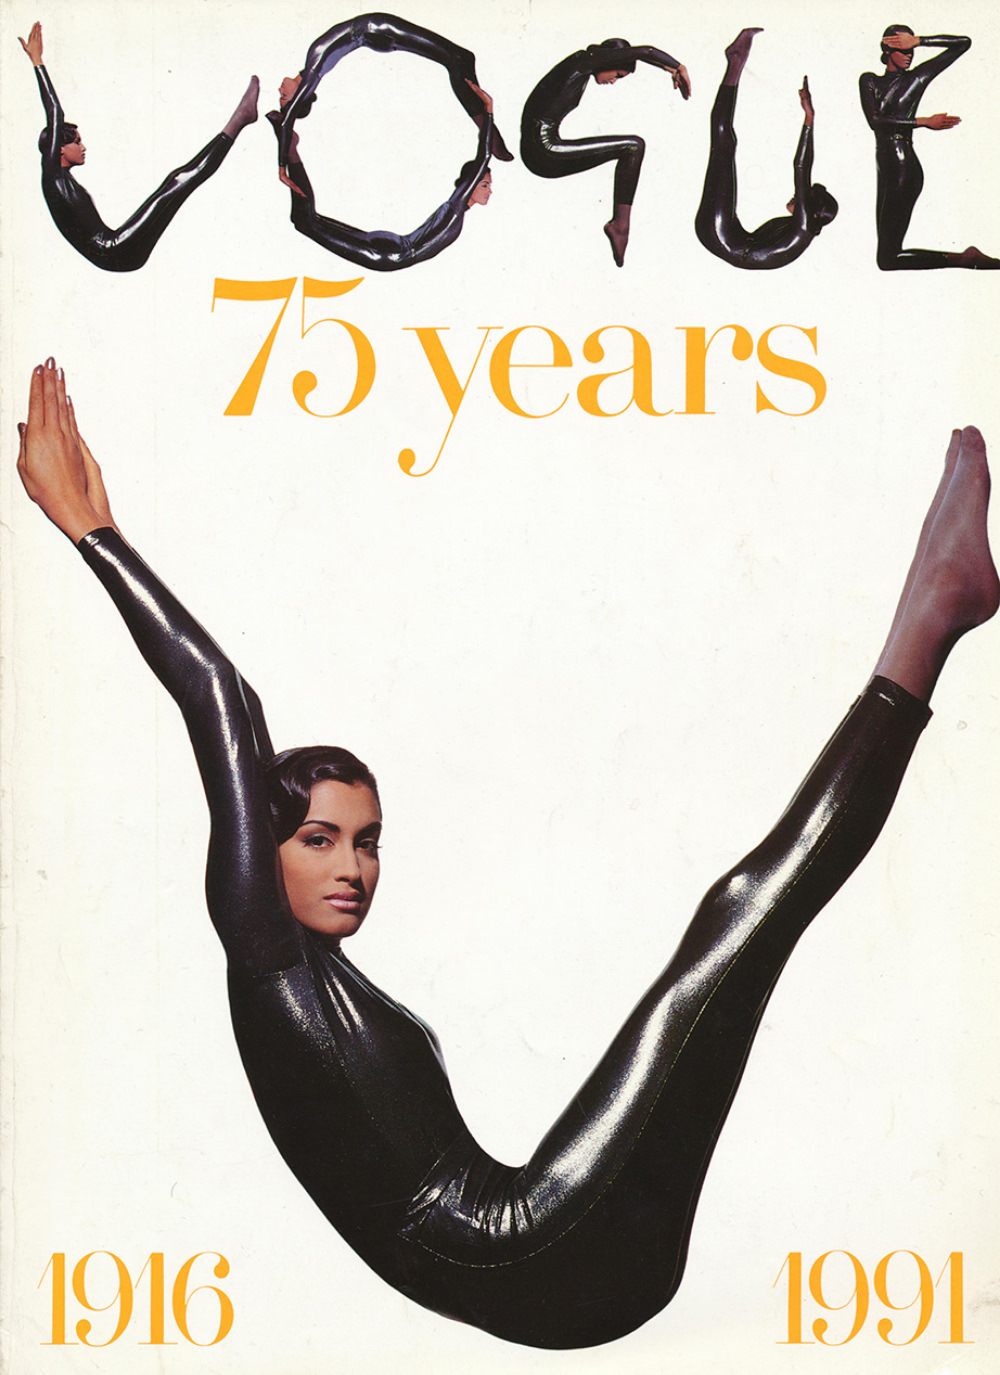 Model Yasmeen Ghauri is dressed in a metallic bodysuit by Karl Lagerfeld. Photographed by Tyen for British Vogue’s Special Edition 75th Anniversary issue in June, 1991.